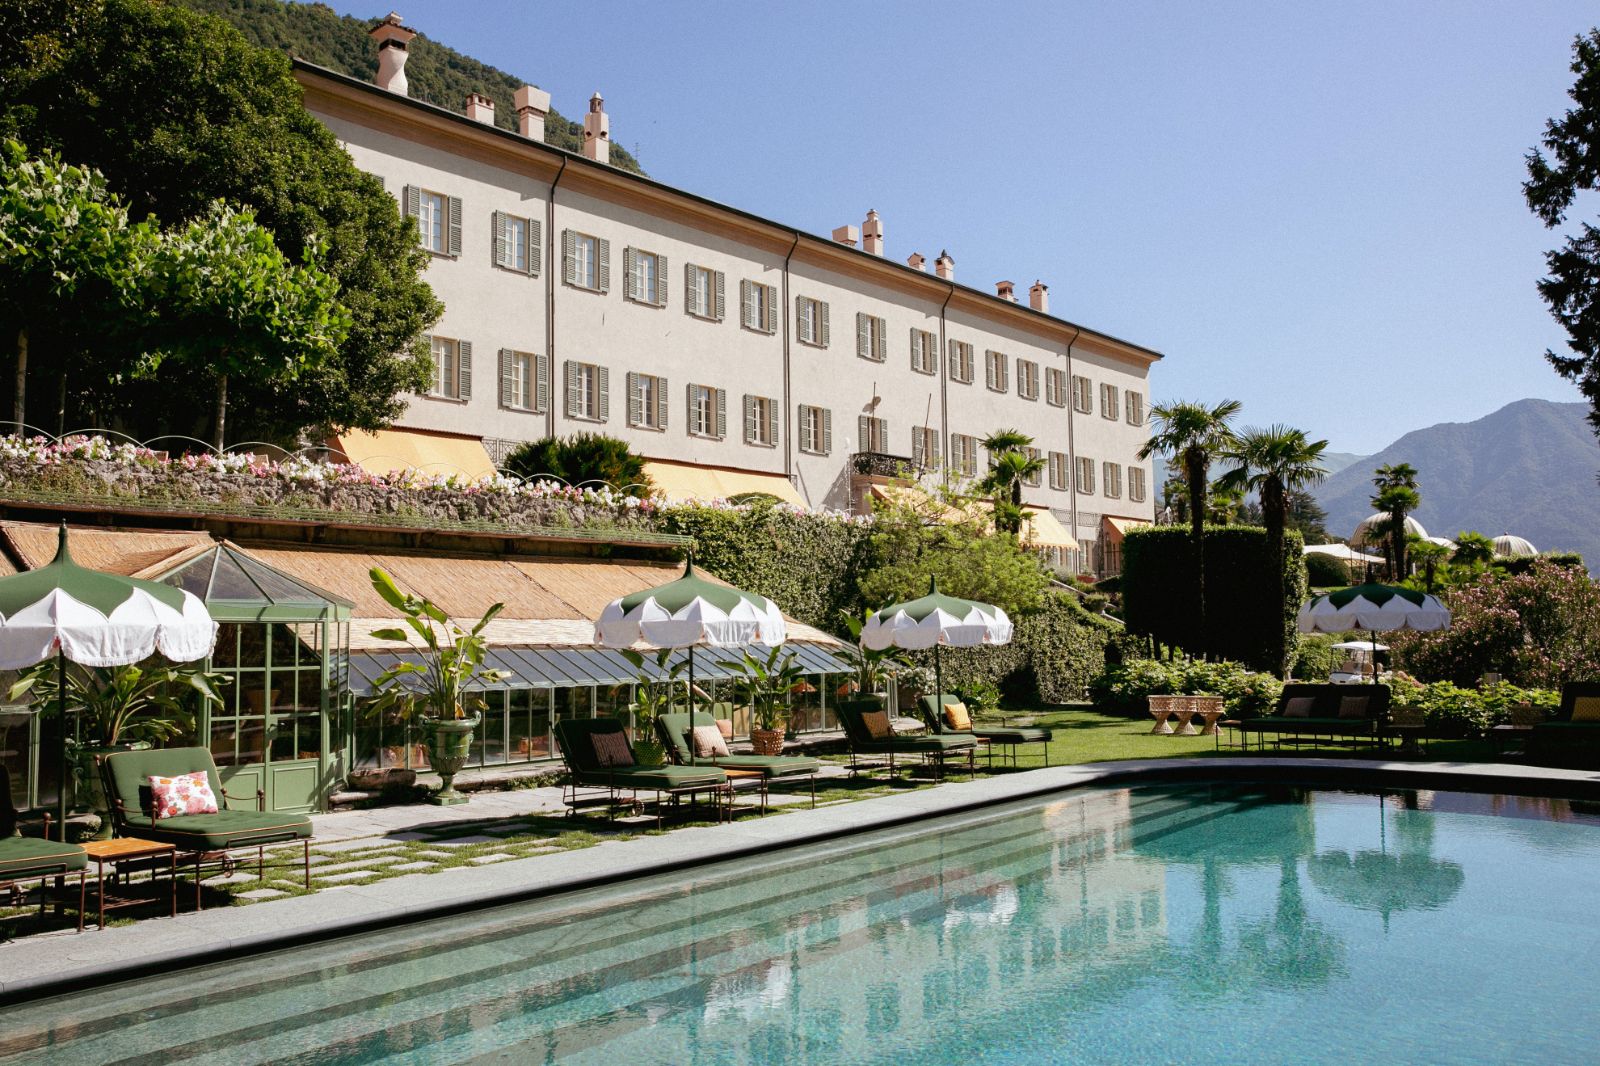 Pool and exterior of Passalacqua on Italy's Lake Como